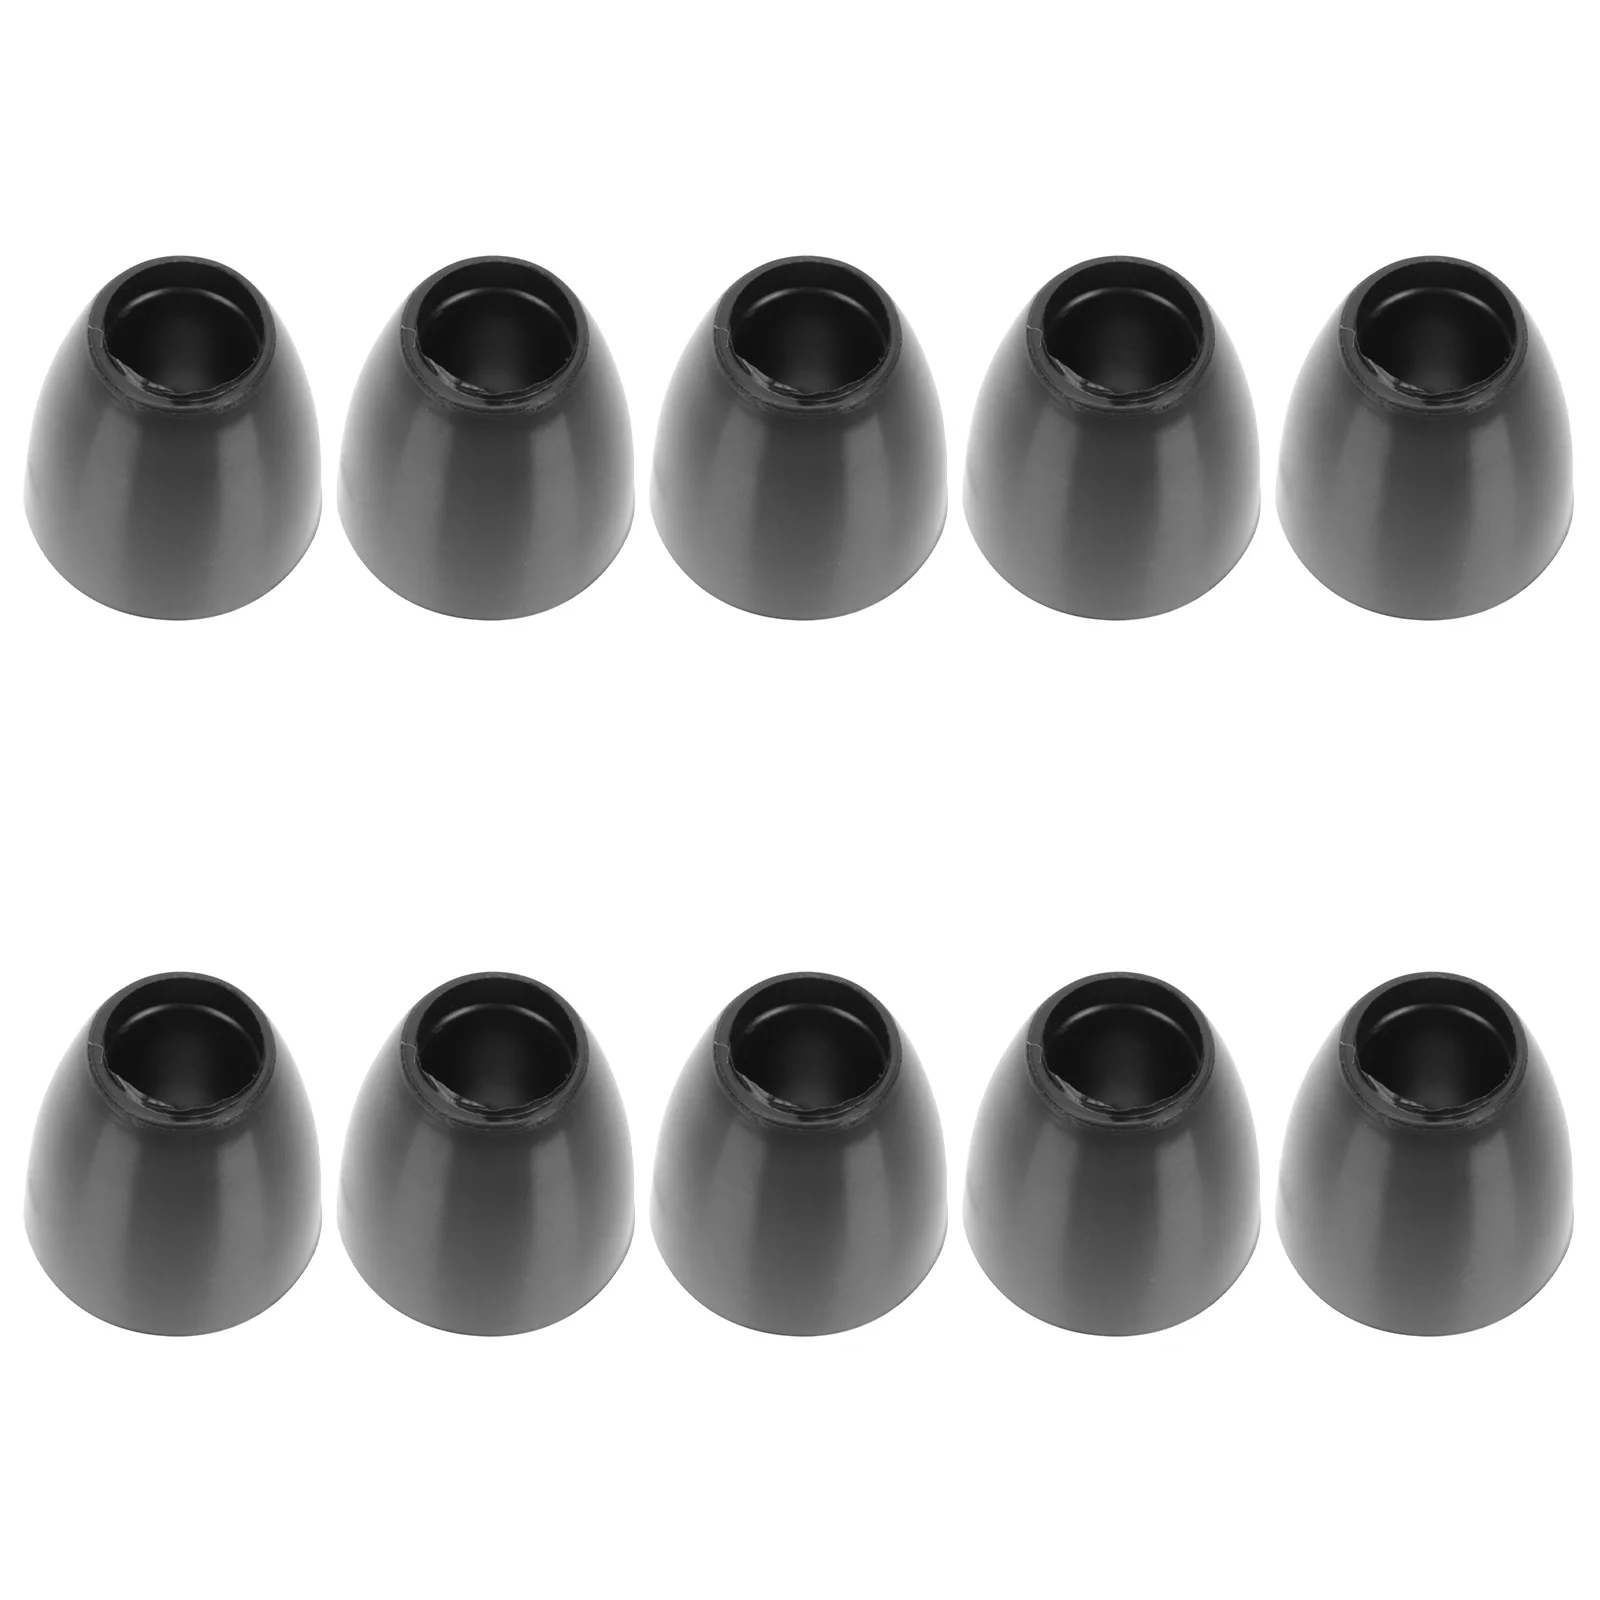 

10 Pairs Stethoscope Earplugs Stethoscopes Echoscope Replacement Tip Tips Black Silicone Accessory